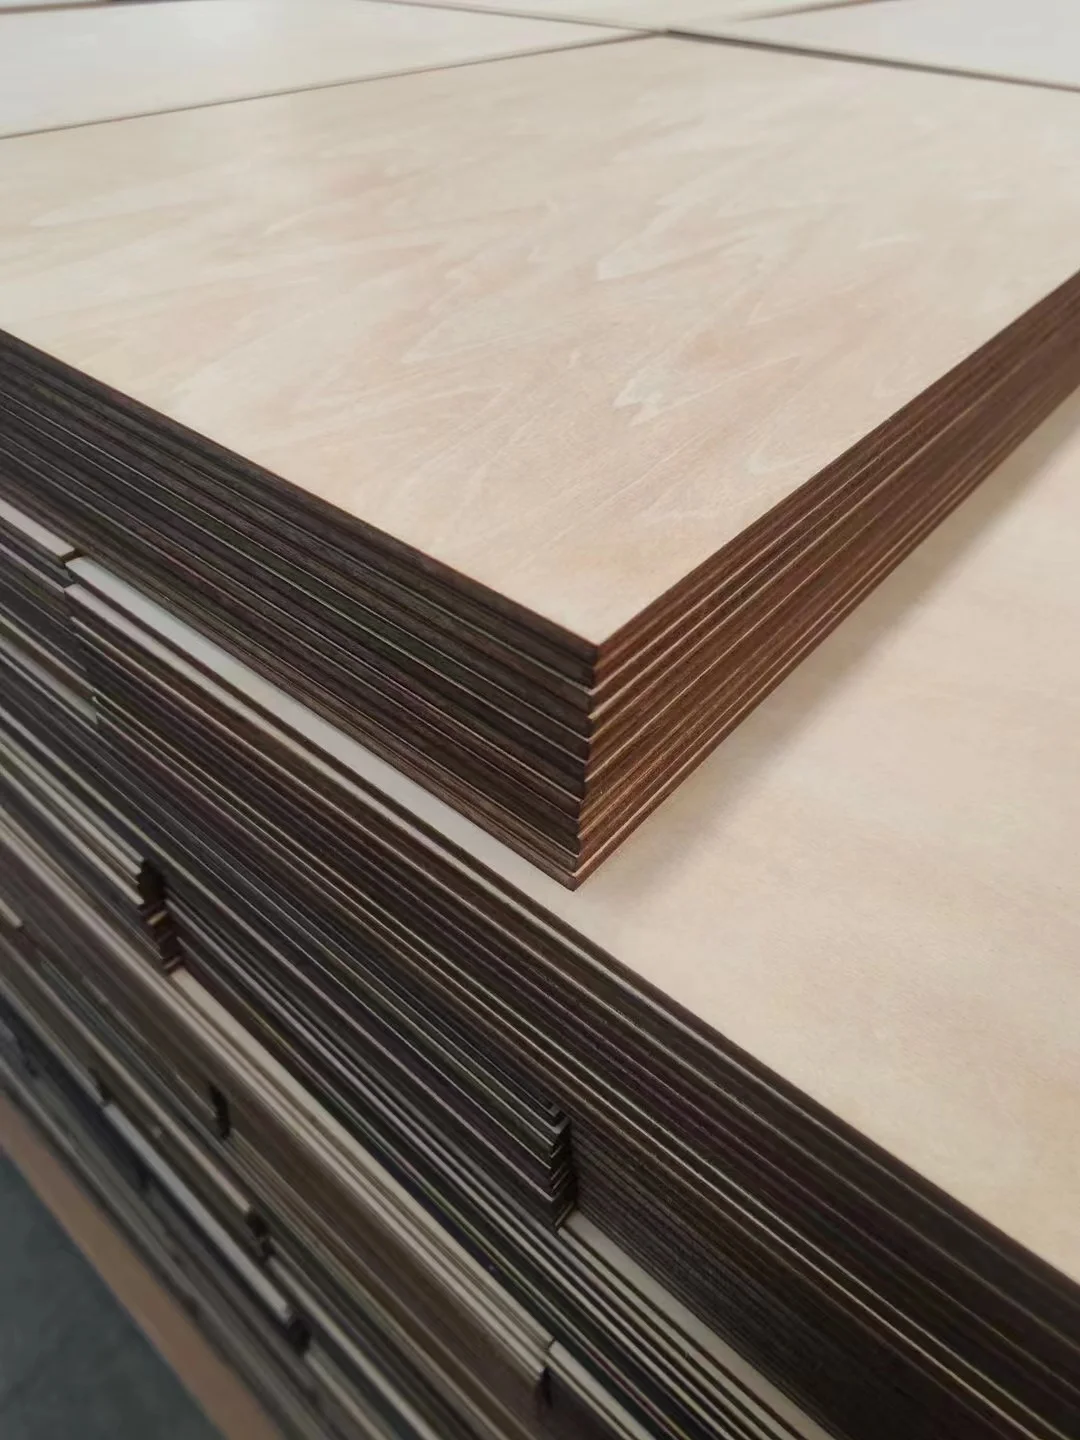 Wholesale Basswood Plywood 1mm 2mm 3mm Basswood Sheets for Laser Cut DIY  Model Craft Puzzle Toys - China 2mm Plywood for Craft, Basswood Plywood